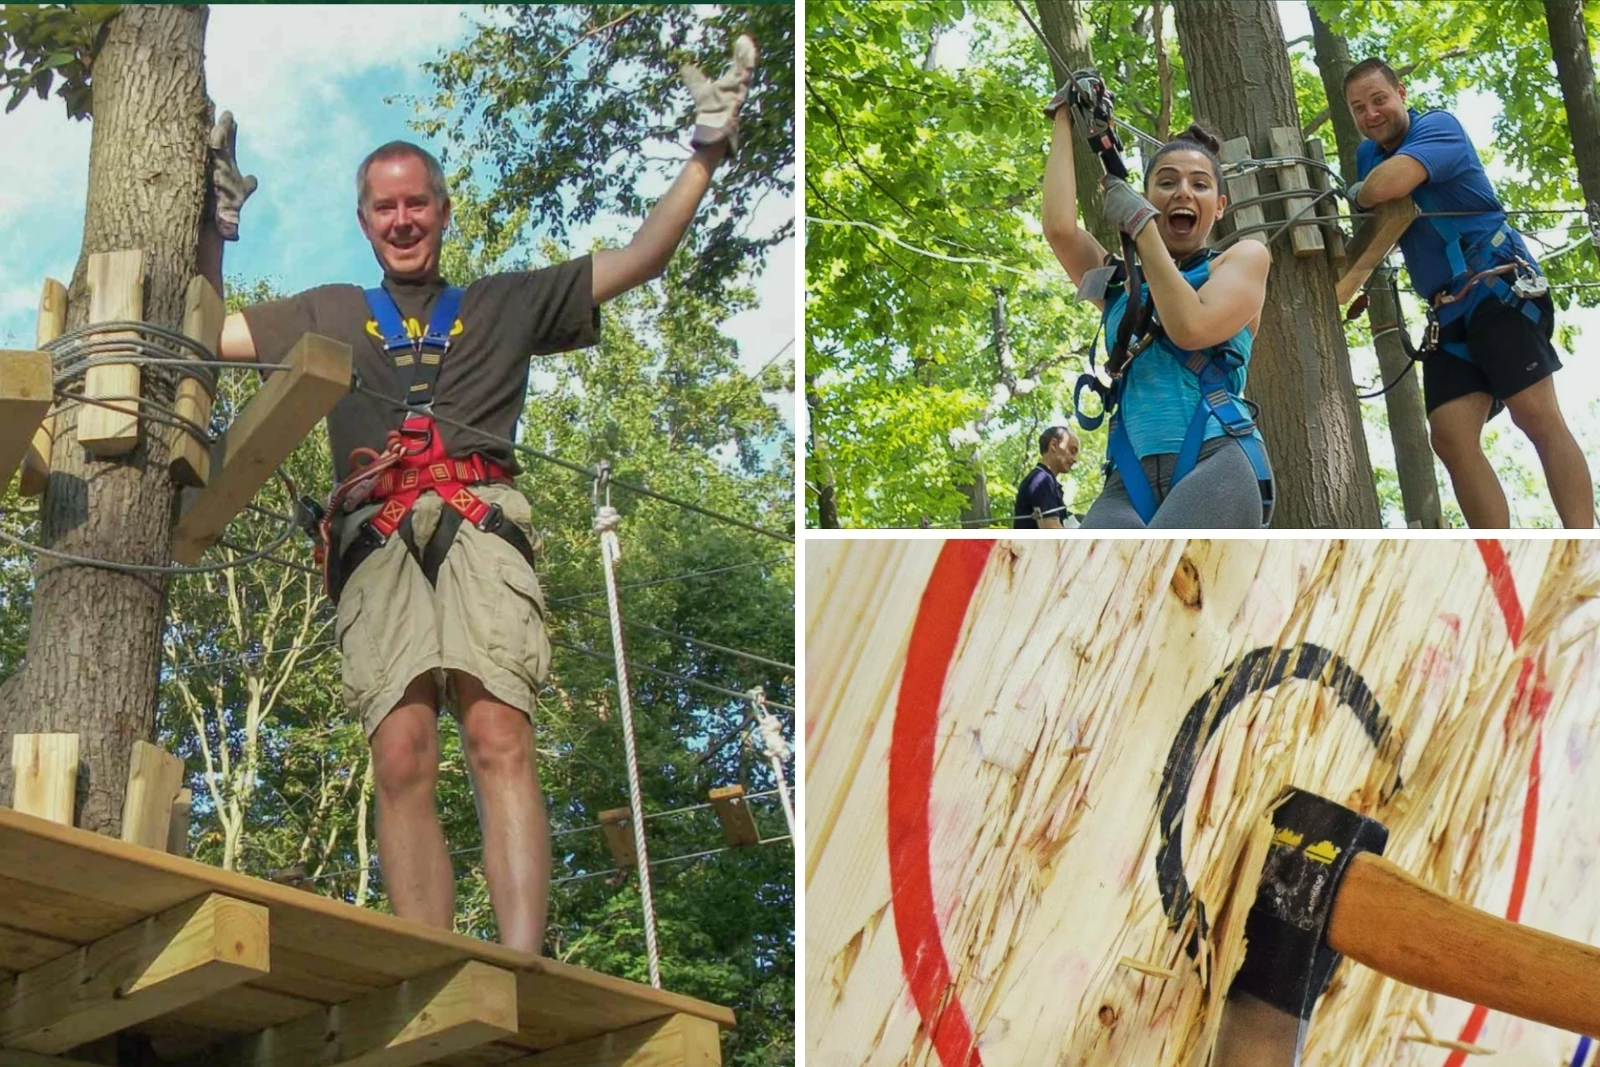 The Adventure Park Now Offers Outdoor Axe-Throwing